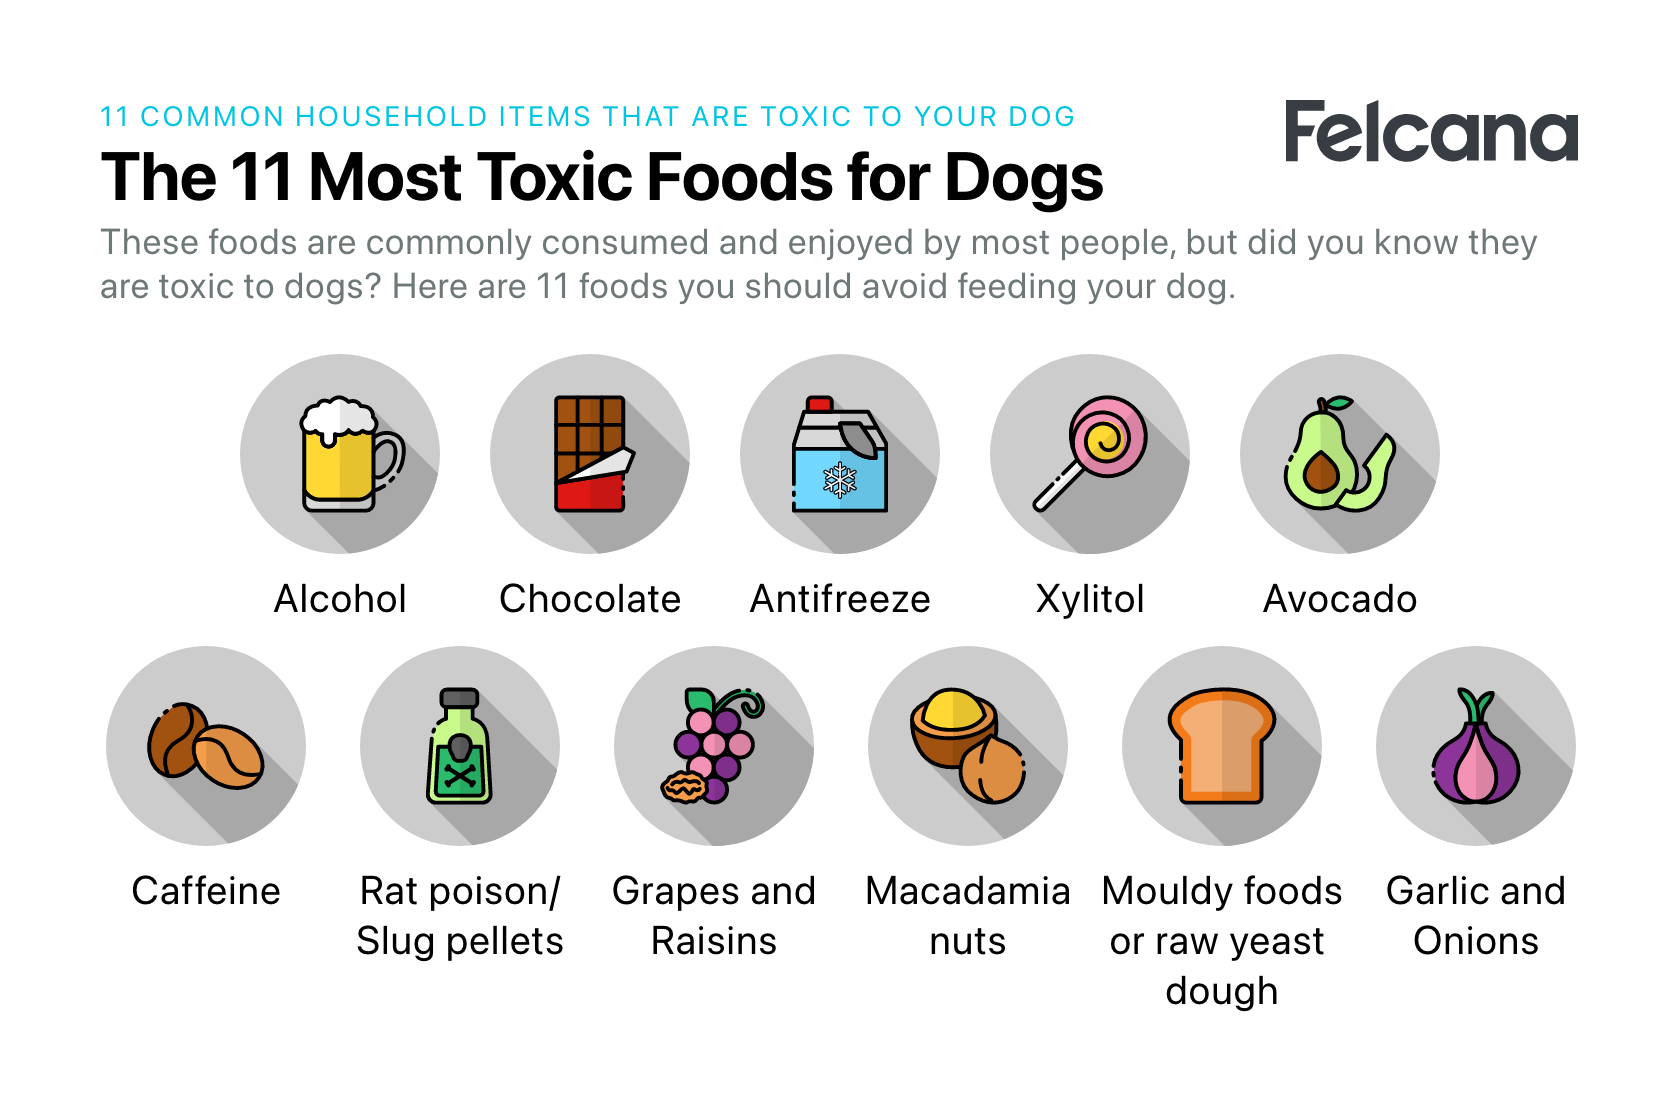 11 most toxic foods for dogs including chocolate, alcohol and avocados